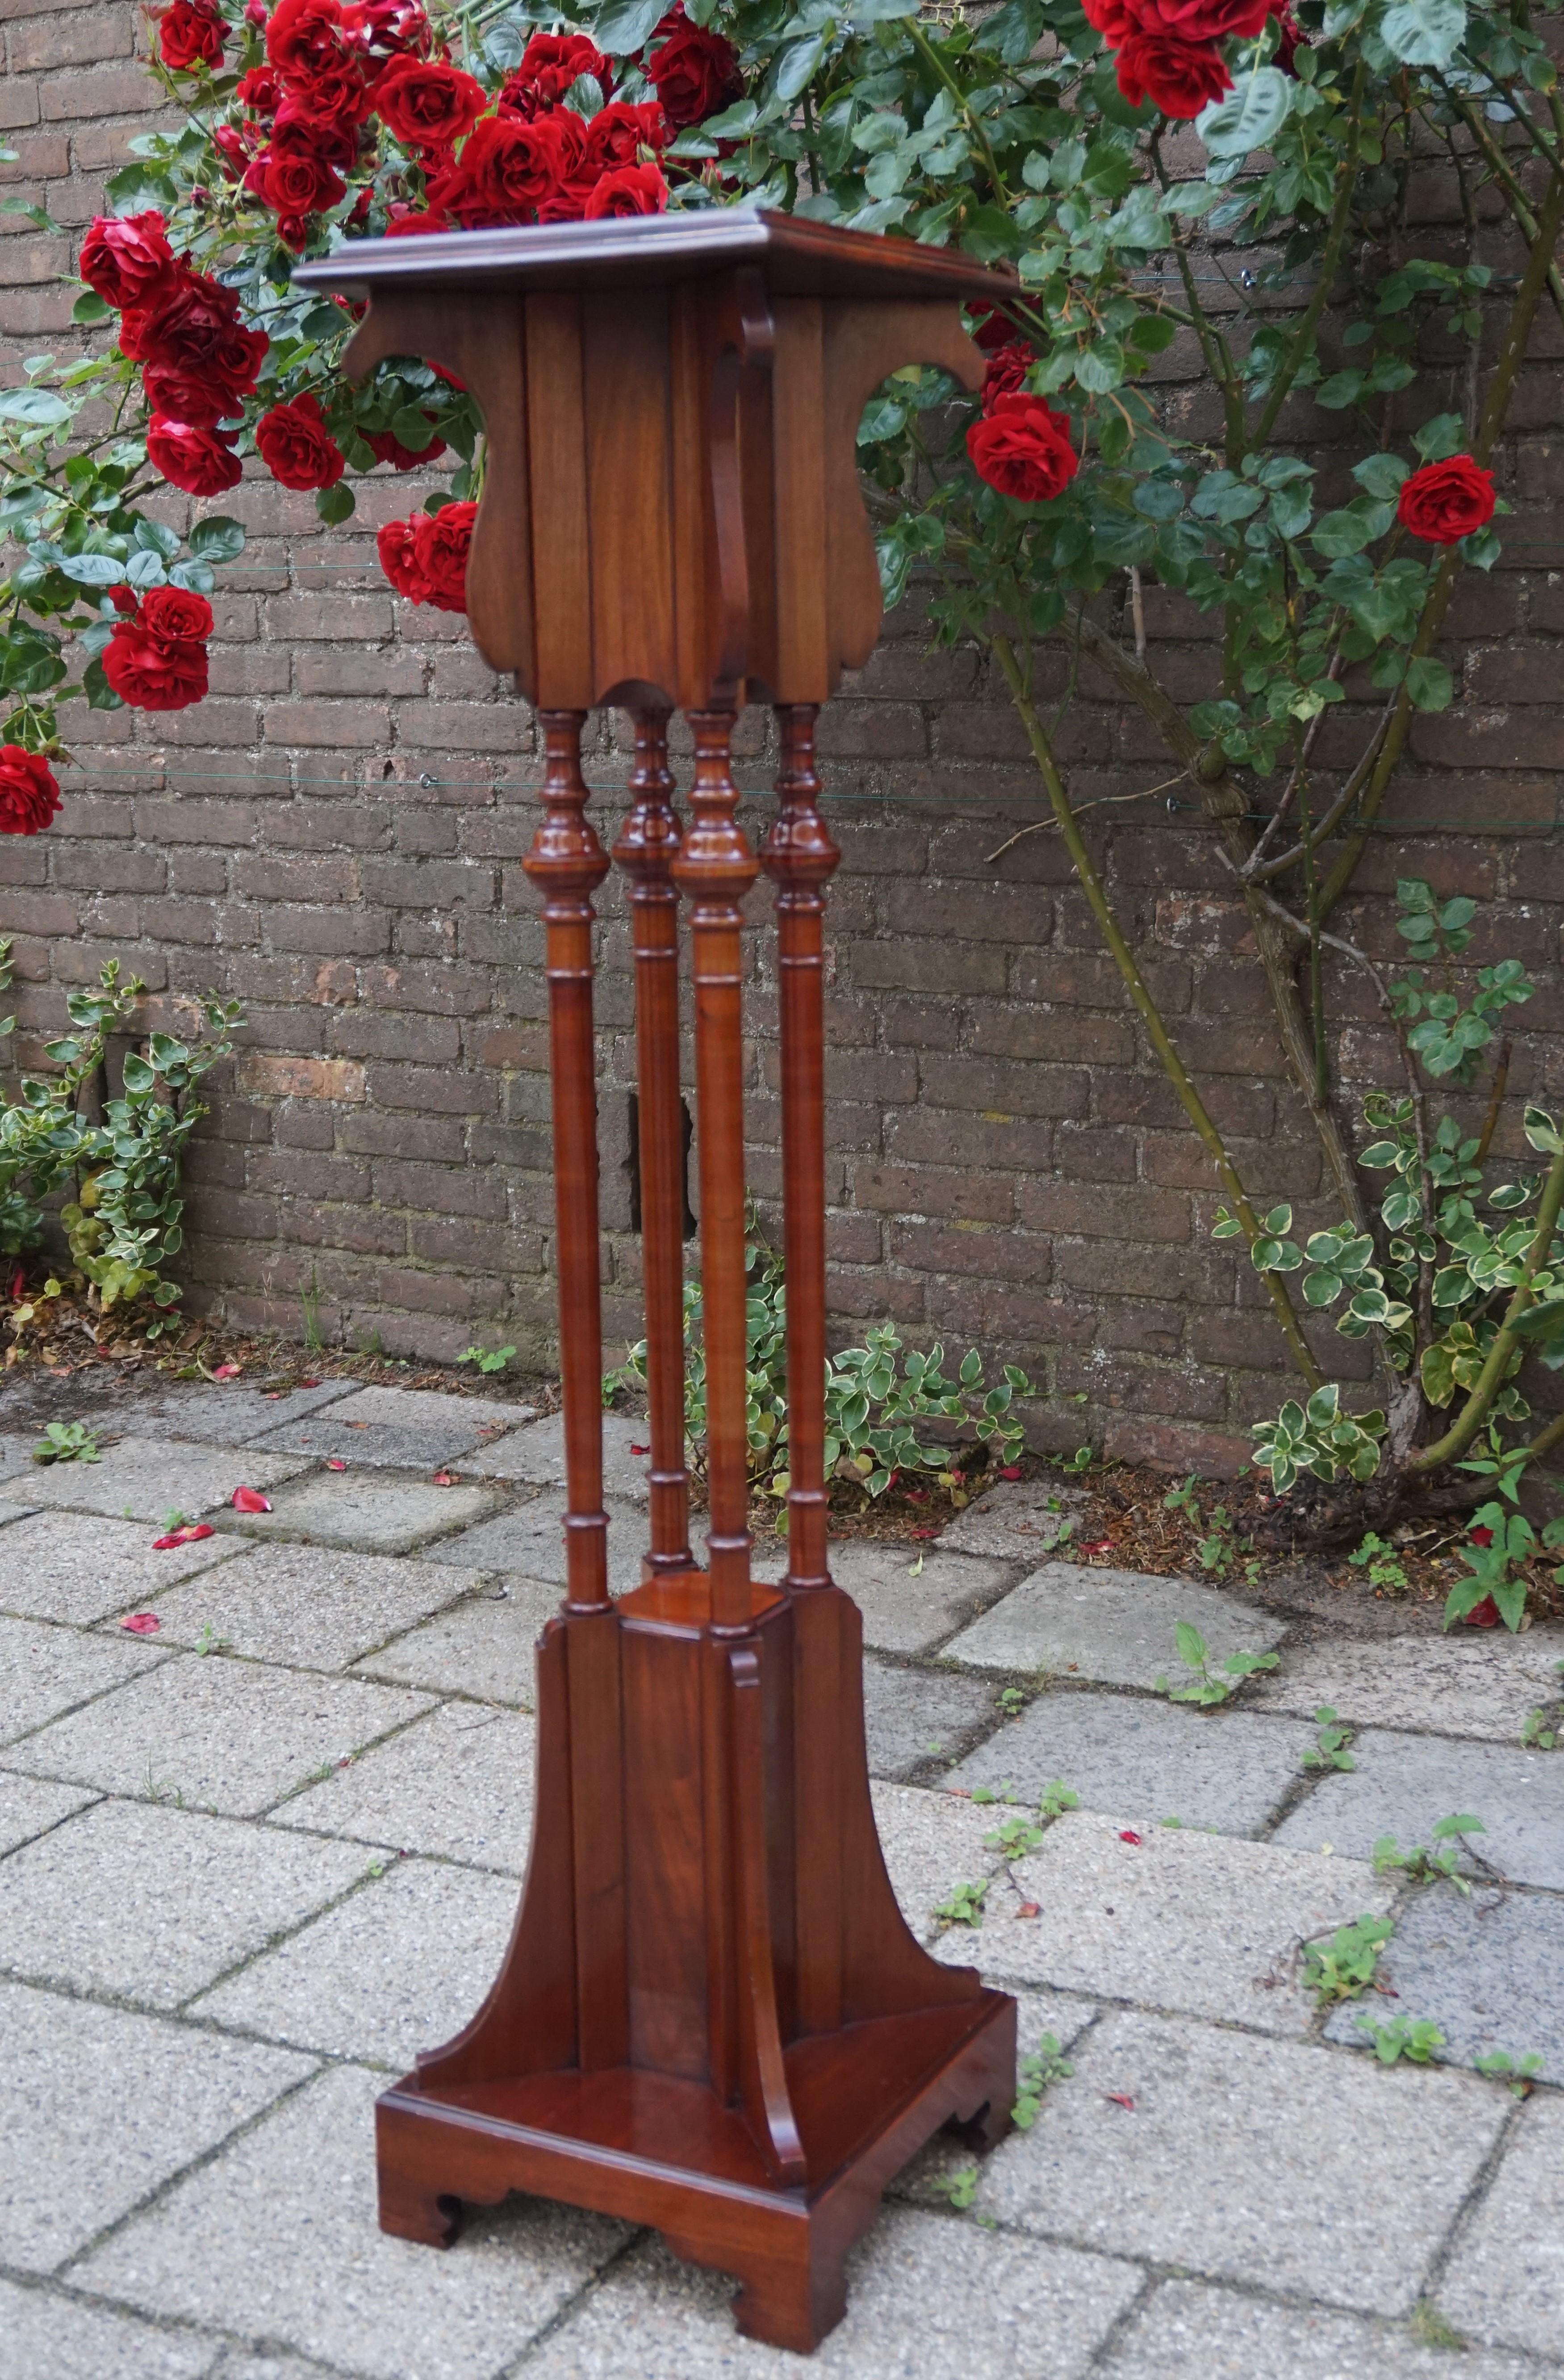 For the collectors and for the home decorators.

The design of this unique and all-handcrafted sculpture stand is simply wonderful, but the grain in the mahogany and the patina take her to the next level. If you follow the lines in the design from